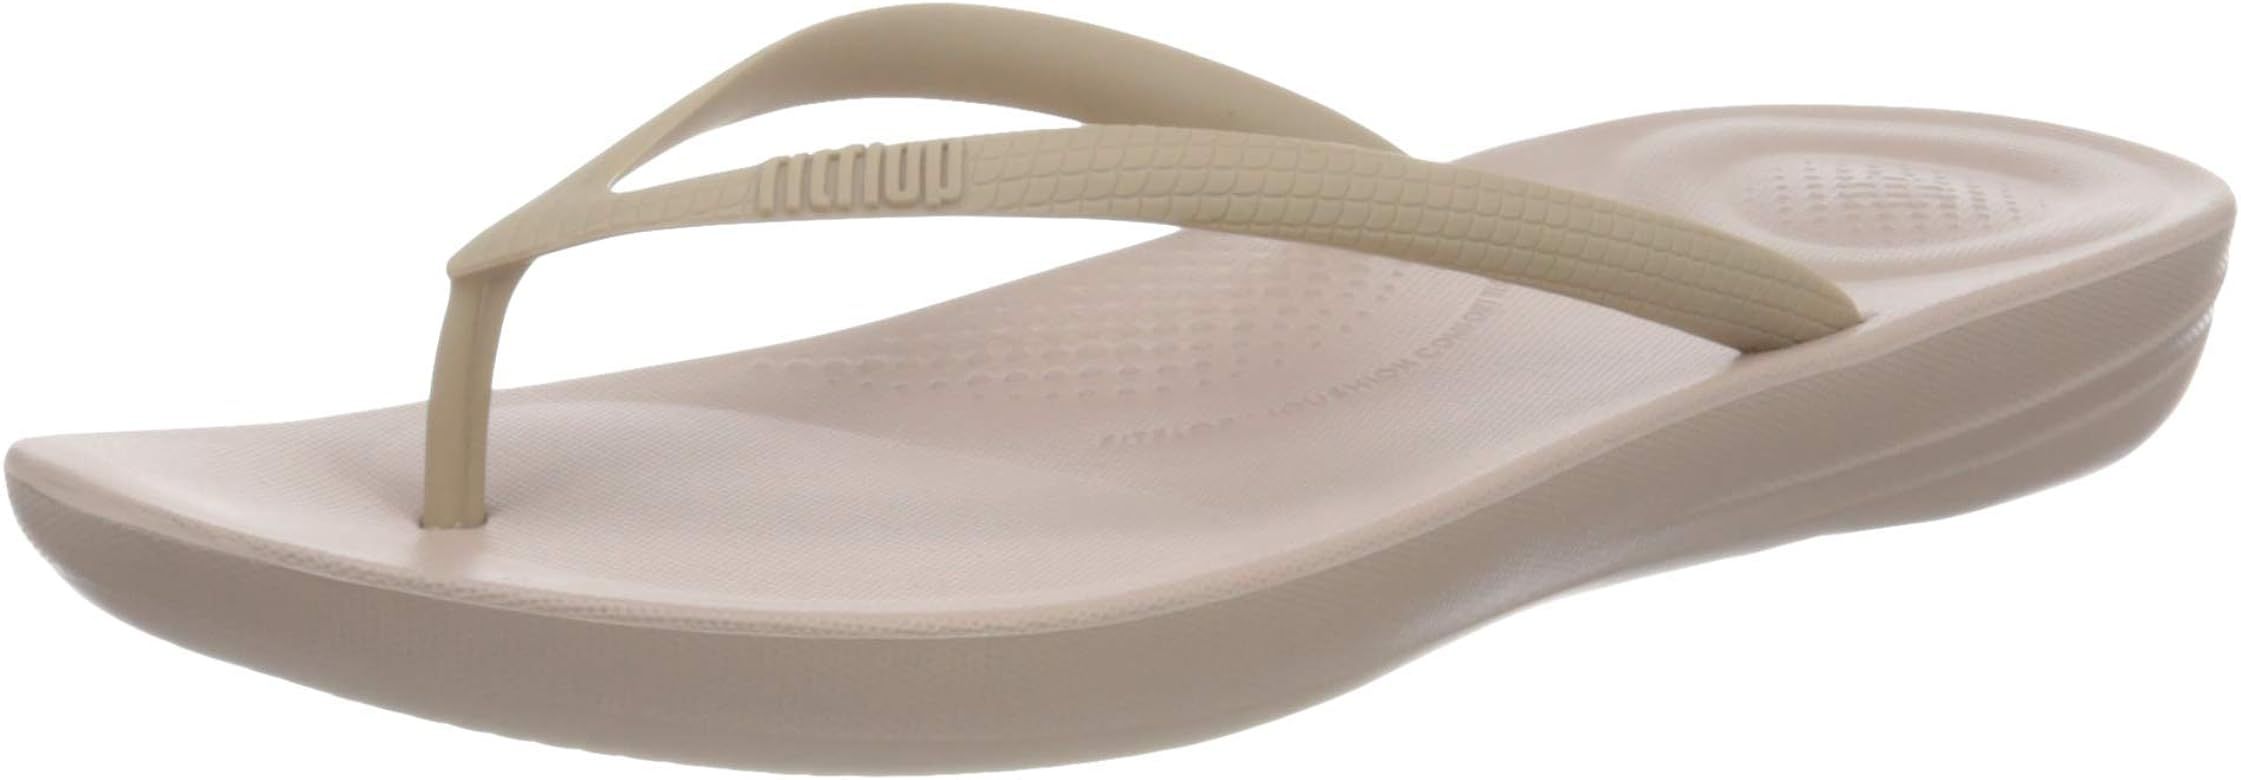 FitFlop Women's Iqushion Flip Flop-Solid | Amazon (US)